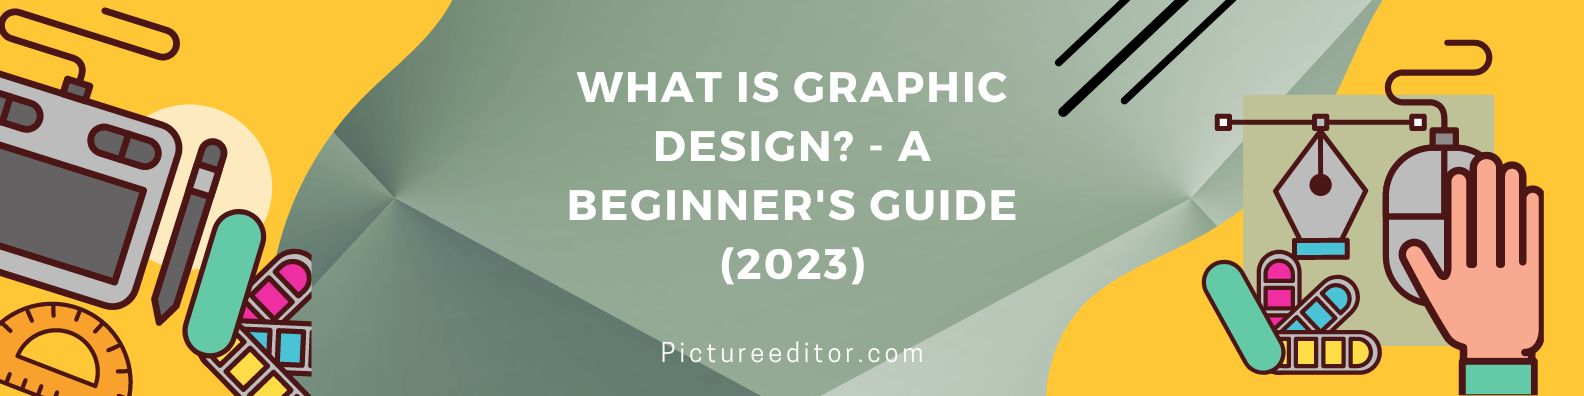 What is Graphic Design - A Beginner's Guide (2023)